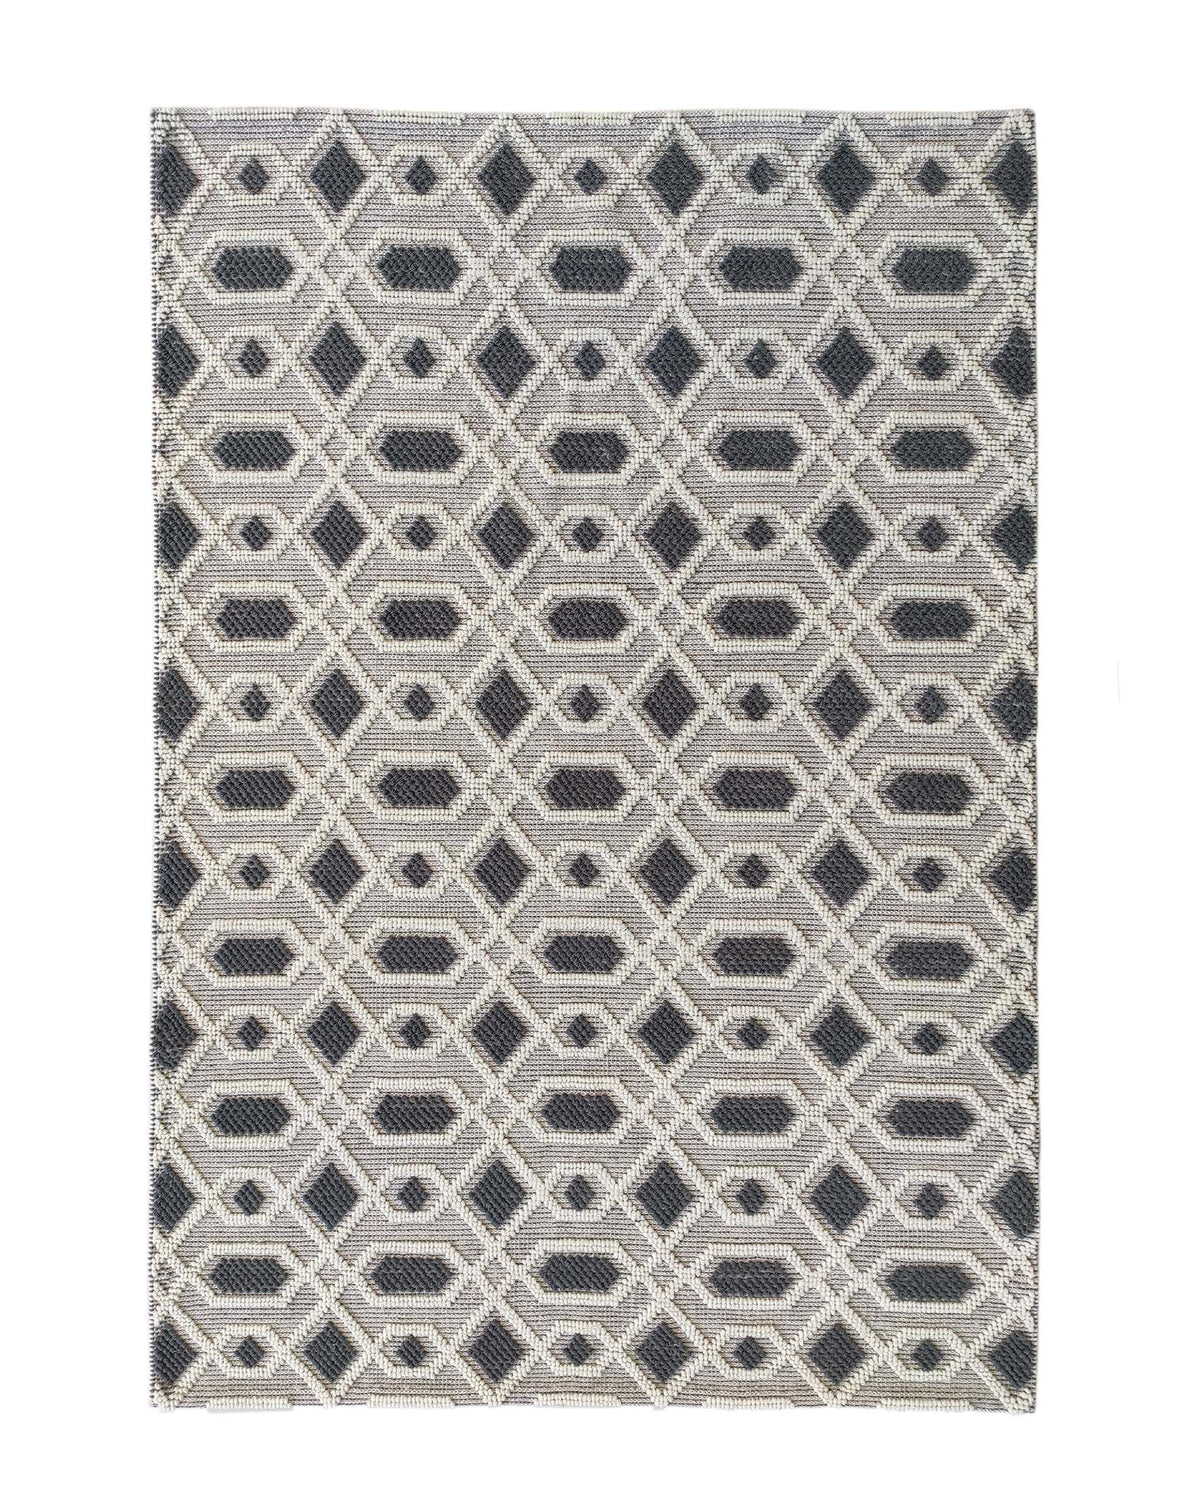 Hand Made Natural White Grey Woven Decor Floor Rug (2 Sizes)